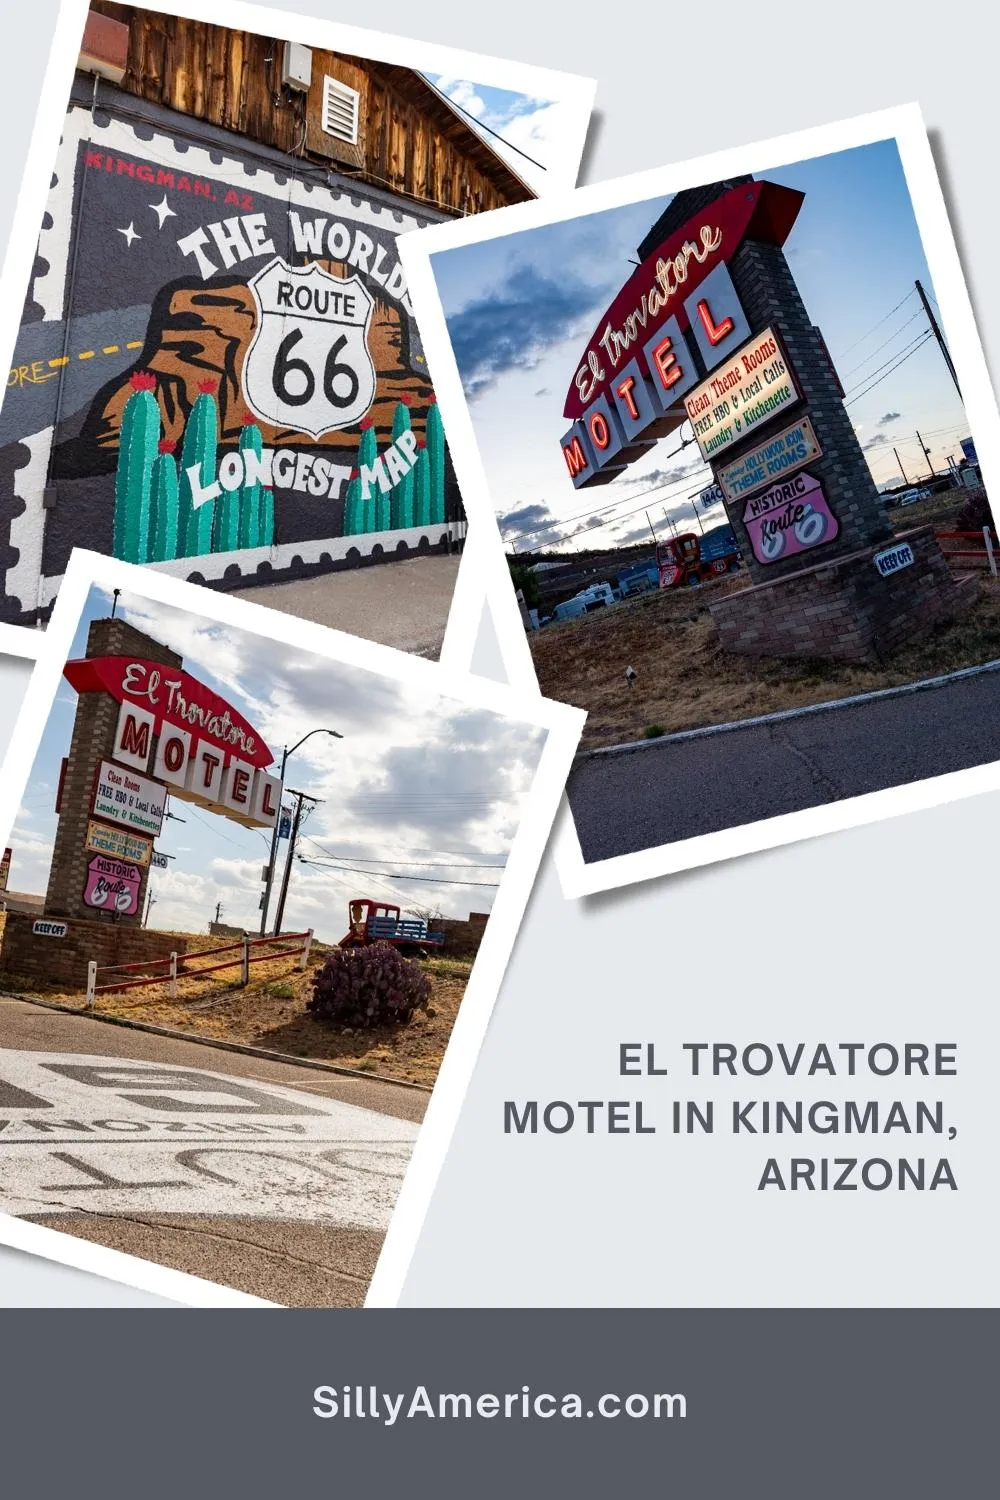 Sleep under the "stars" by the glow of a neon light. El Trovatore Motel in Kingman, Arizona is known for being one of the best motels on Route 66, for once attracting some of the biggest stars in Hollywood, and for its famous neon sign. Pull off the road, book a room, and spend the night in one of their Hollywood themed rooms on Route 66! Stay in theme rooms in a Route 66 motel with a famous neon sign. Stop on a road trip! #Route66 #Route66Hotel #Route66Motel #Route66RoadTrip #Arizona